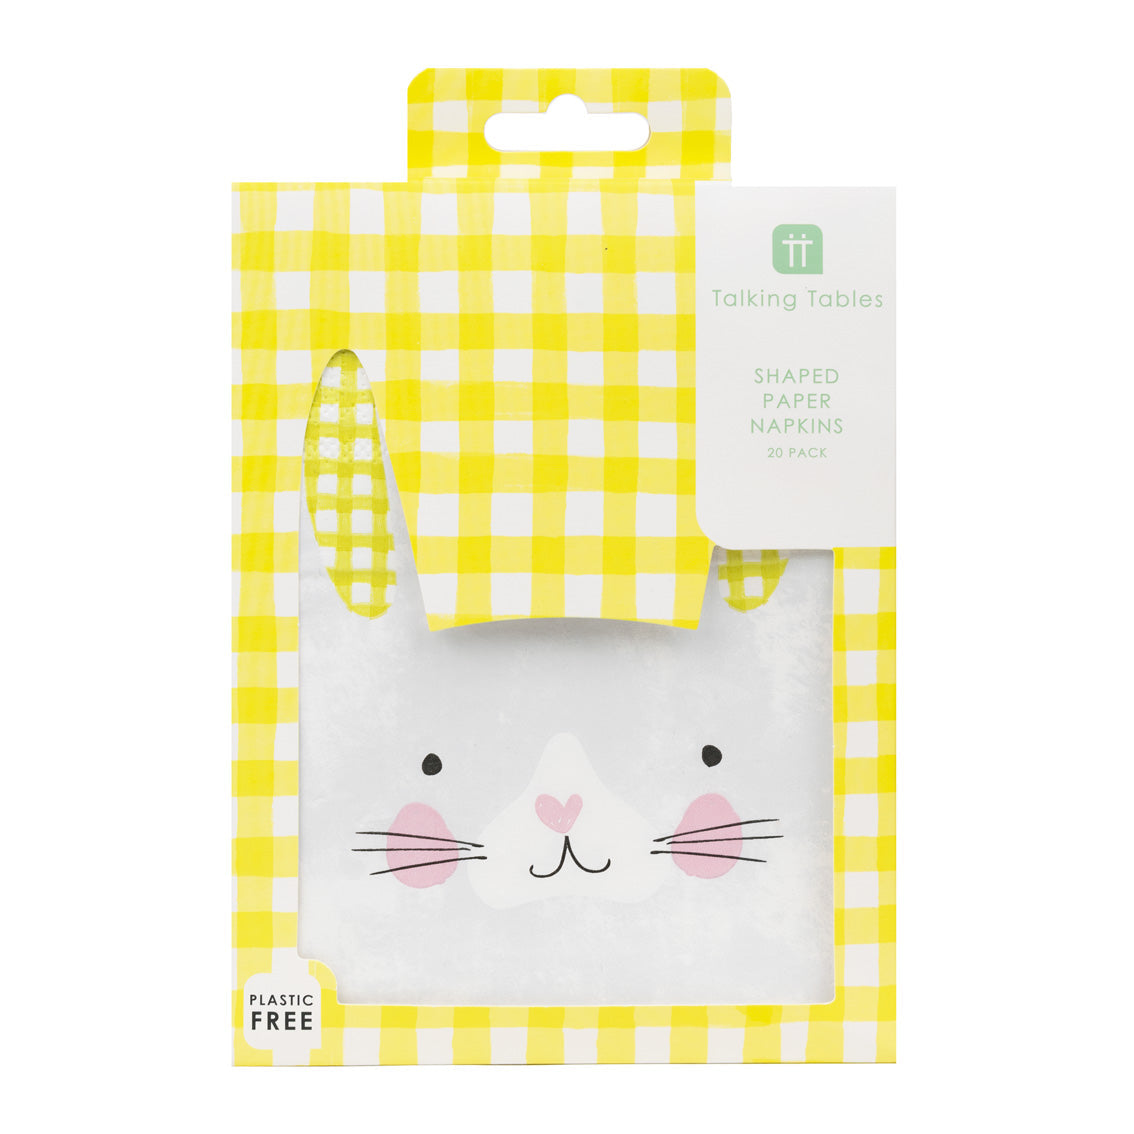 Bunny Shaped Paper Napkins - 20 Pack by penny black